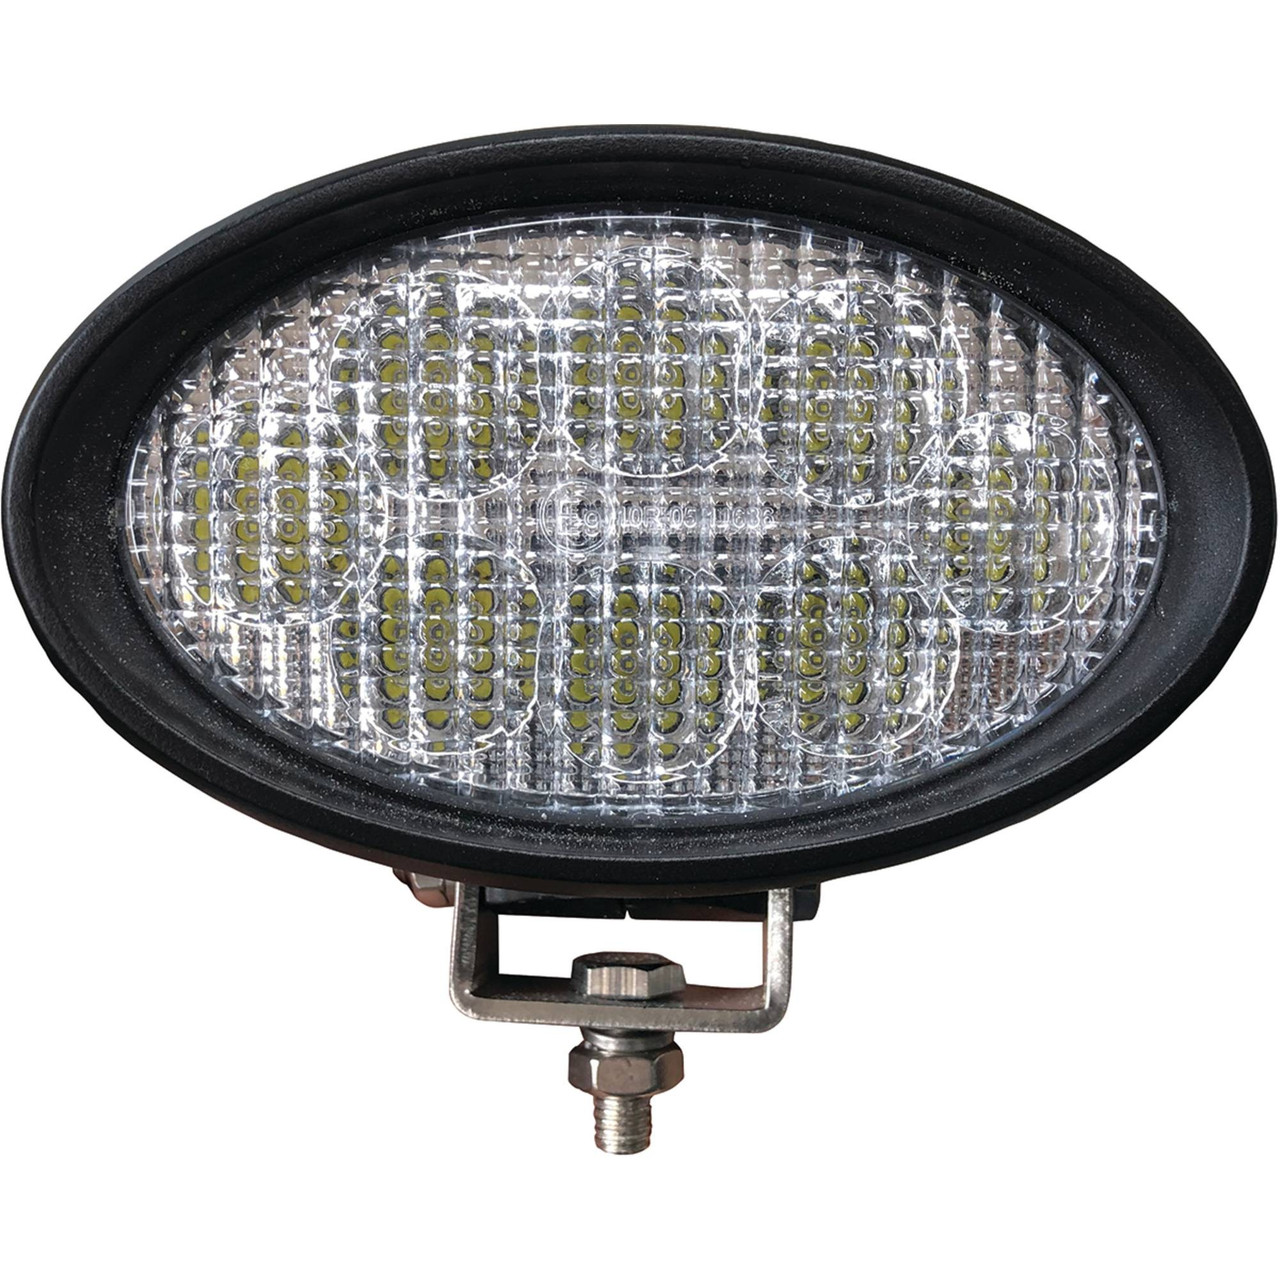 LED Work Light w/Swivel Mount for Agco & Massey Tractors, TL7080  Agricultural LED Lights; from Tiger Lights